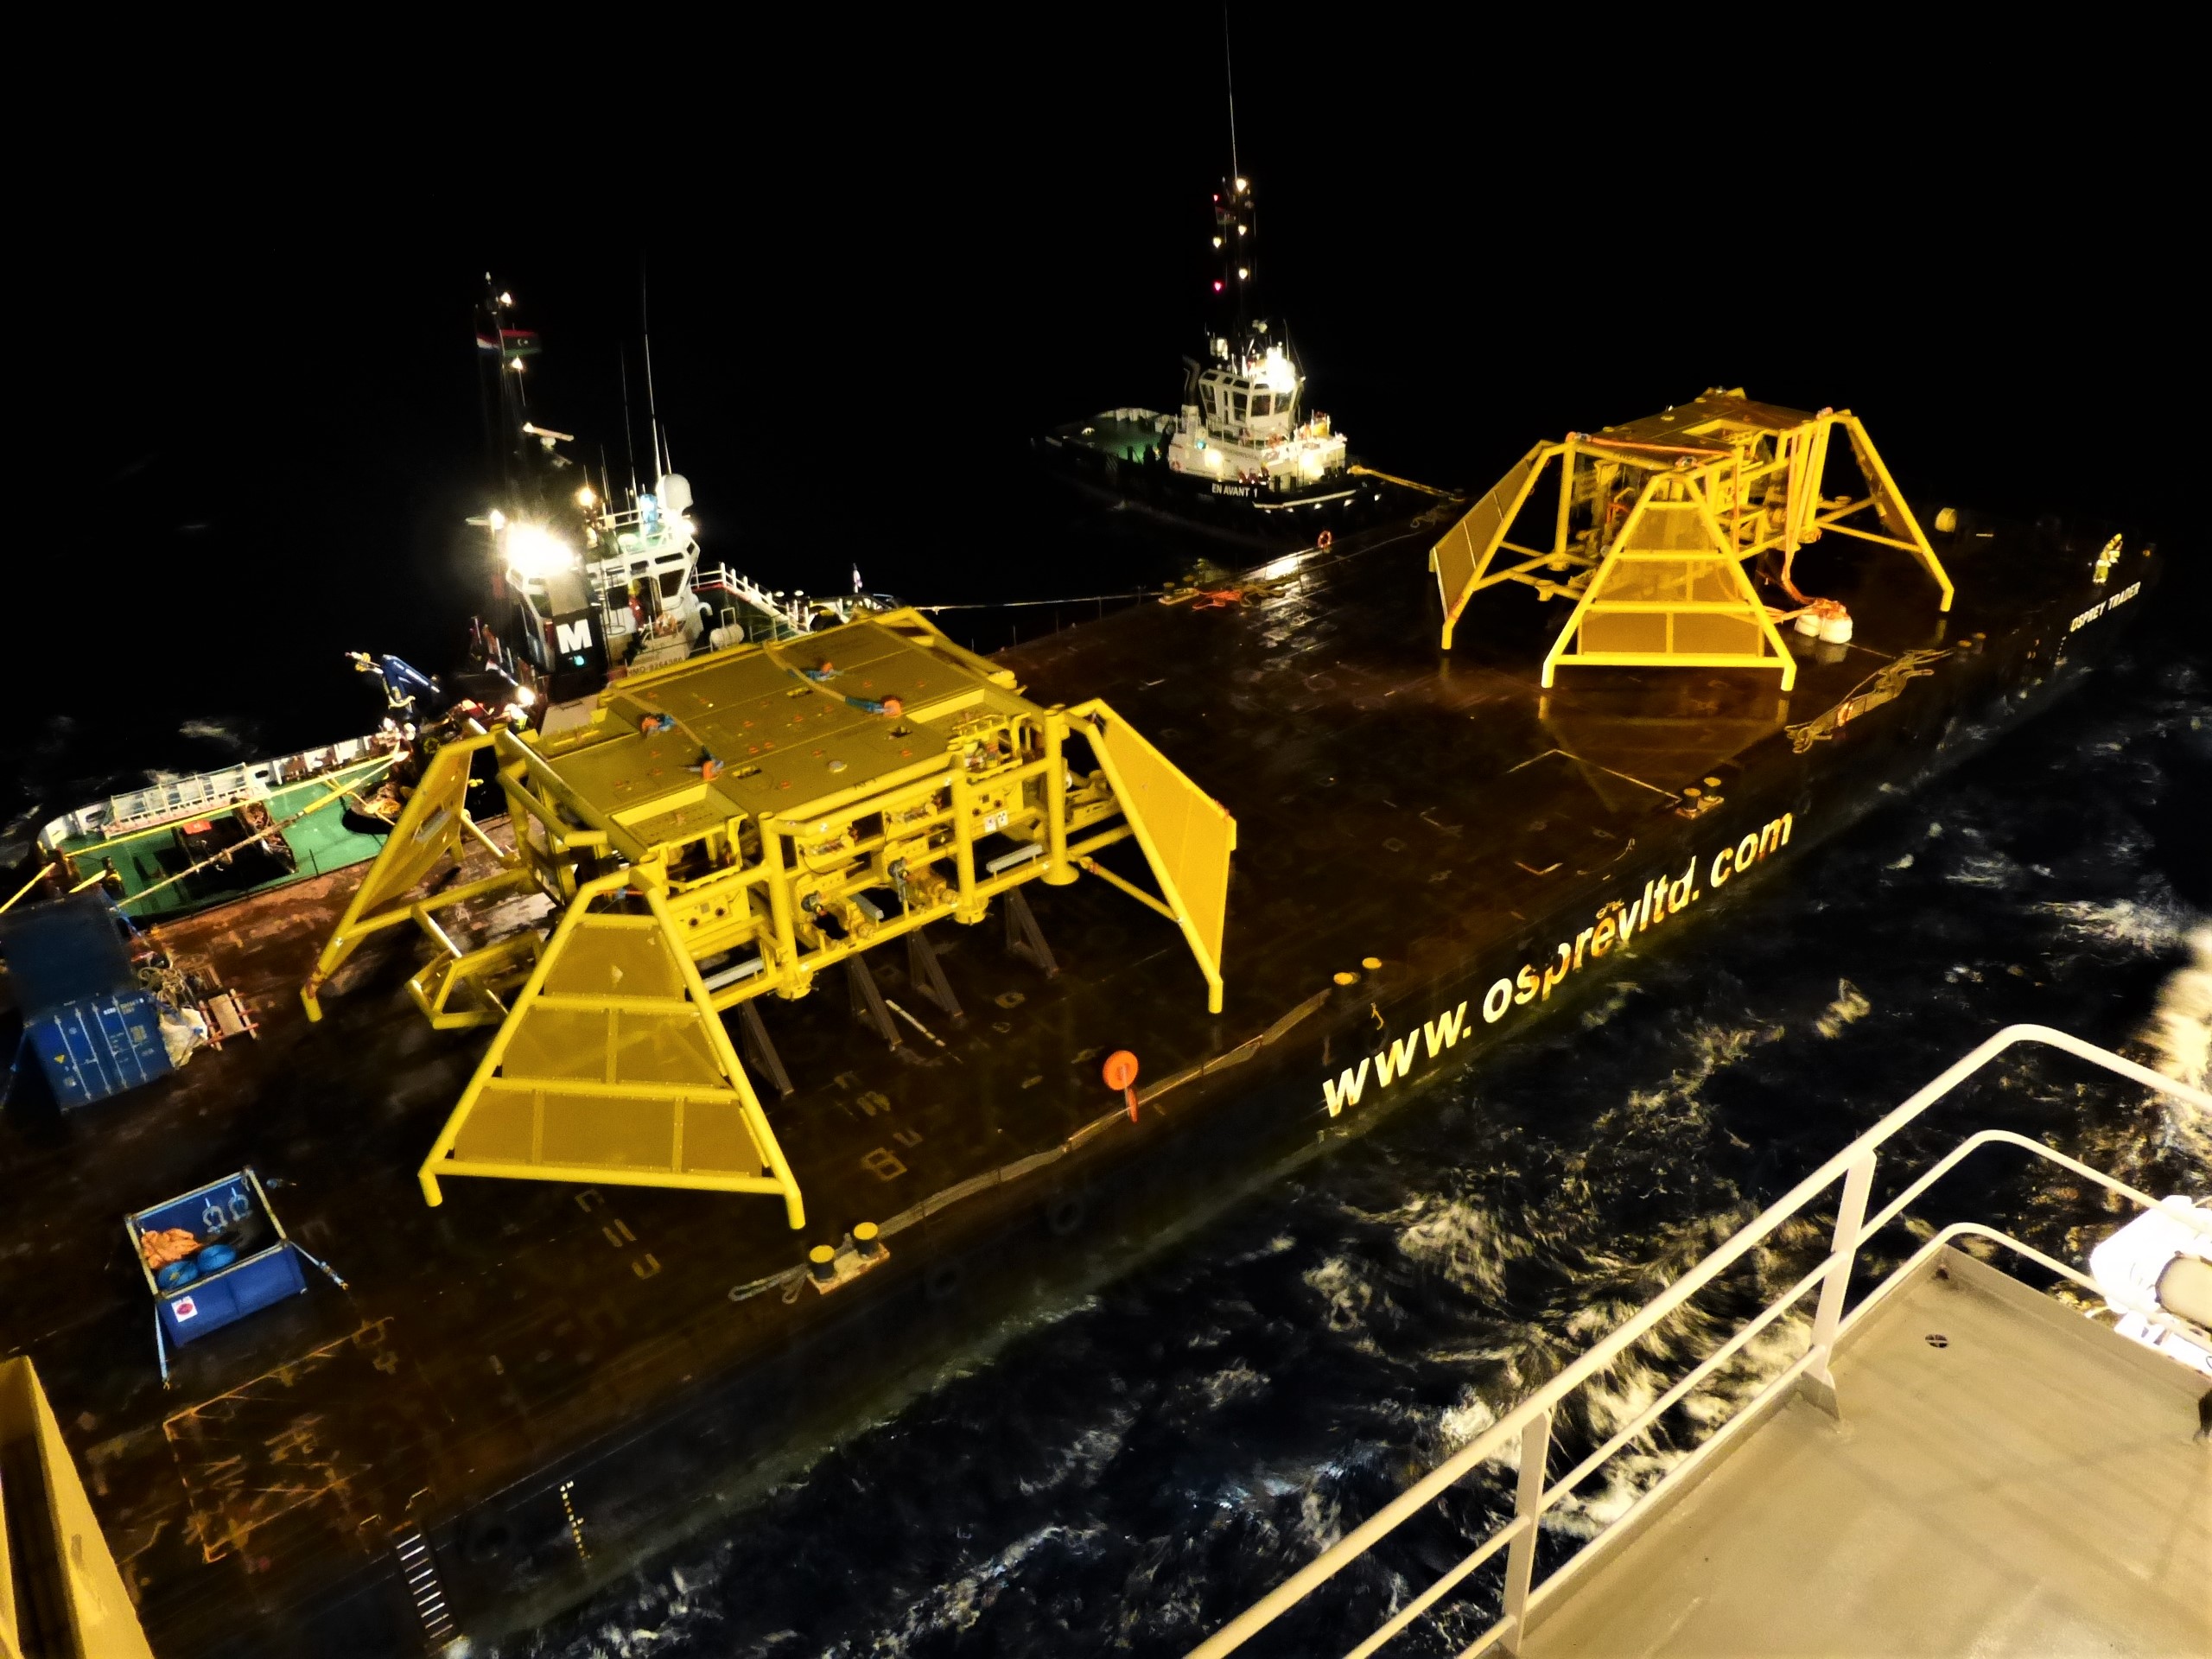 Subsea oil and gas image of Osprey Group barge with subsea equipment on it